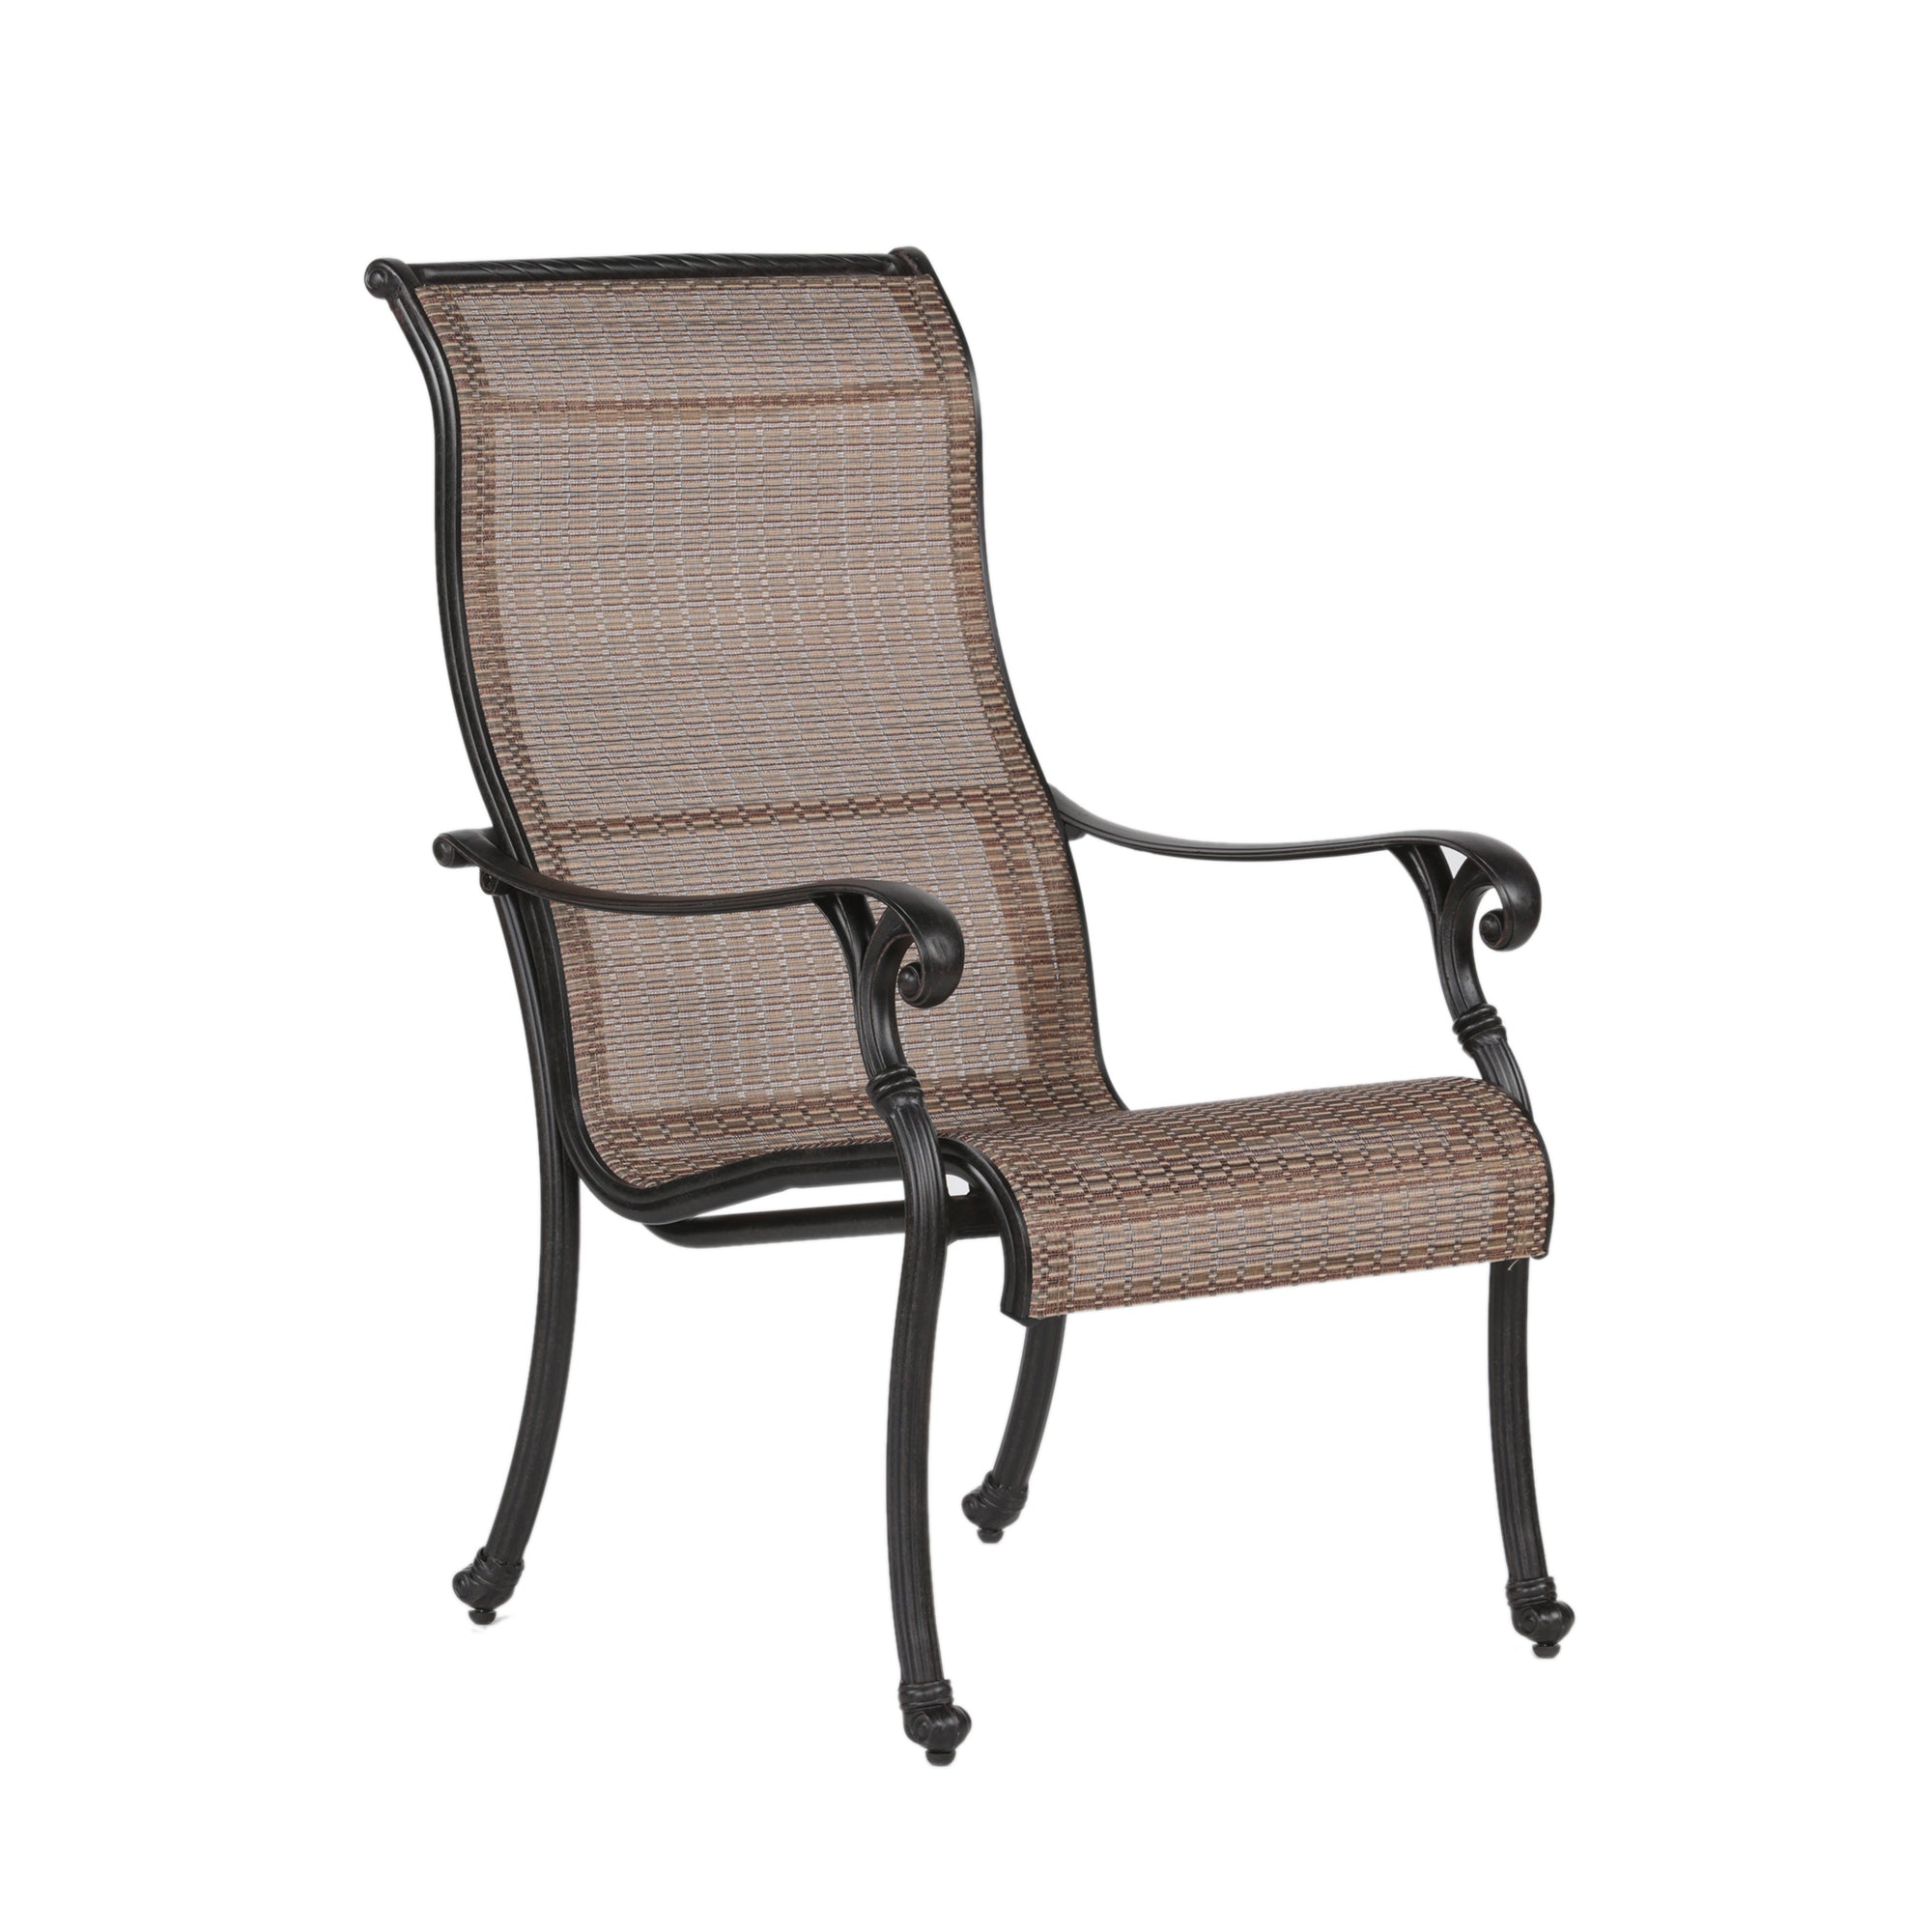 Patio Outdoor Sling Patio 2 Chairs With Aluminum